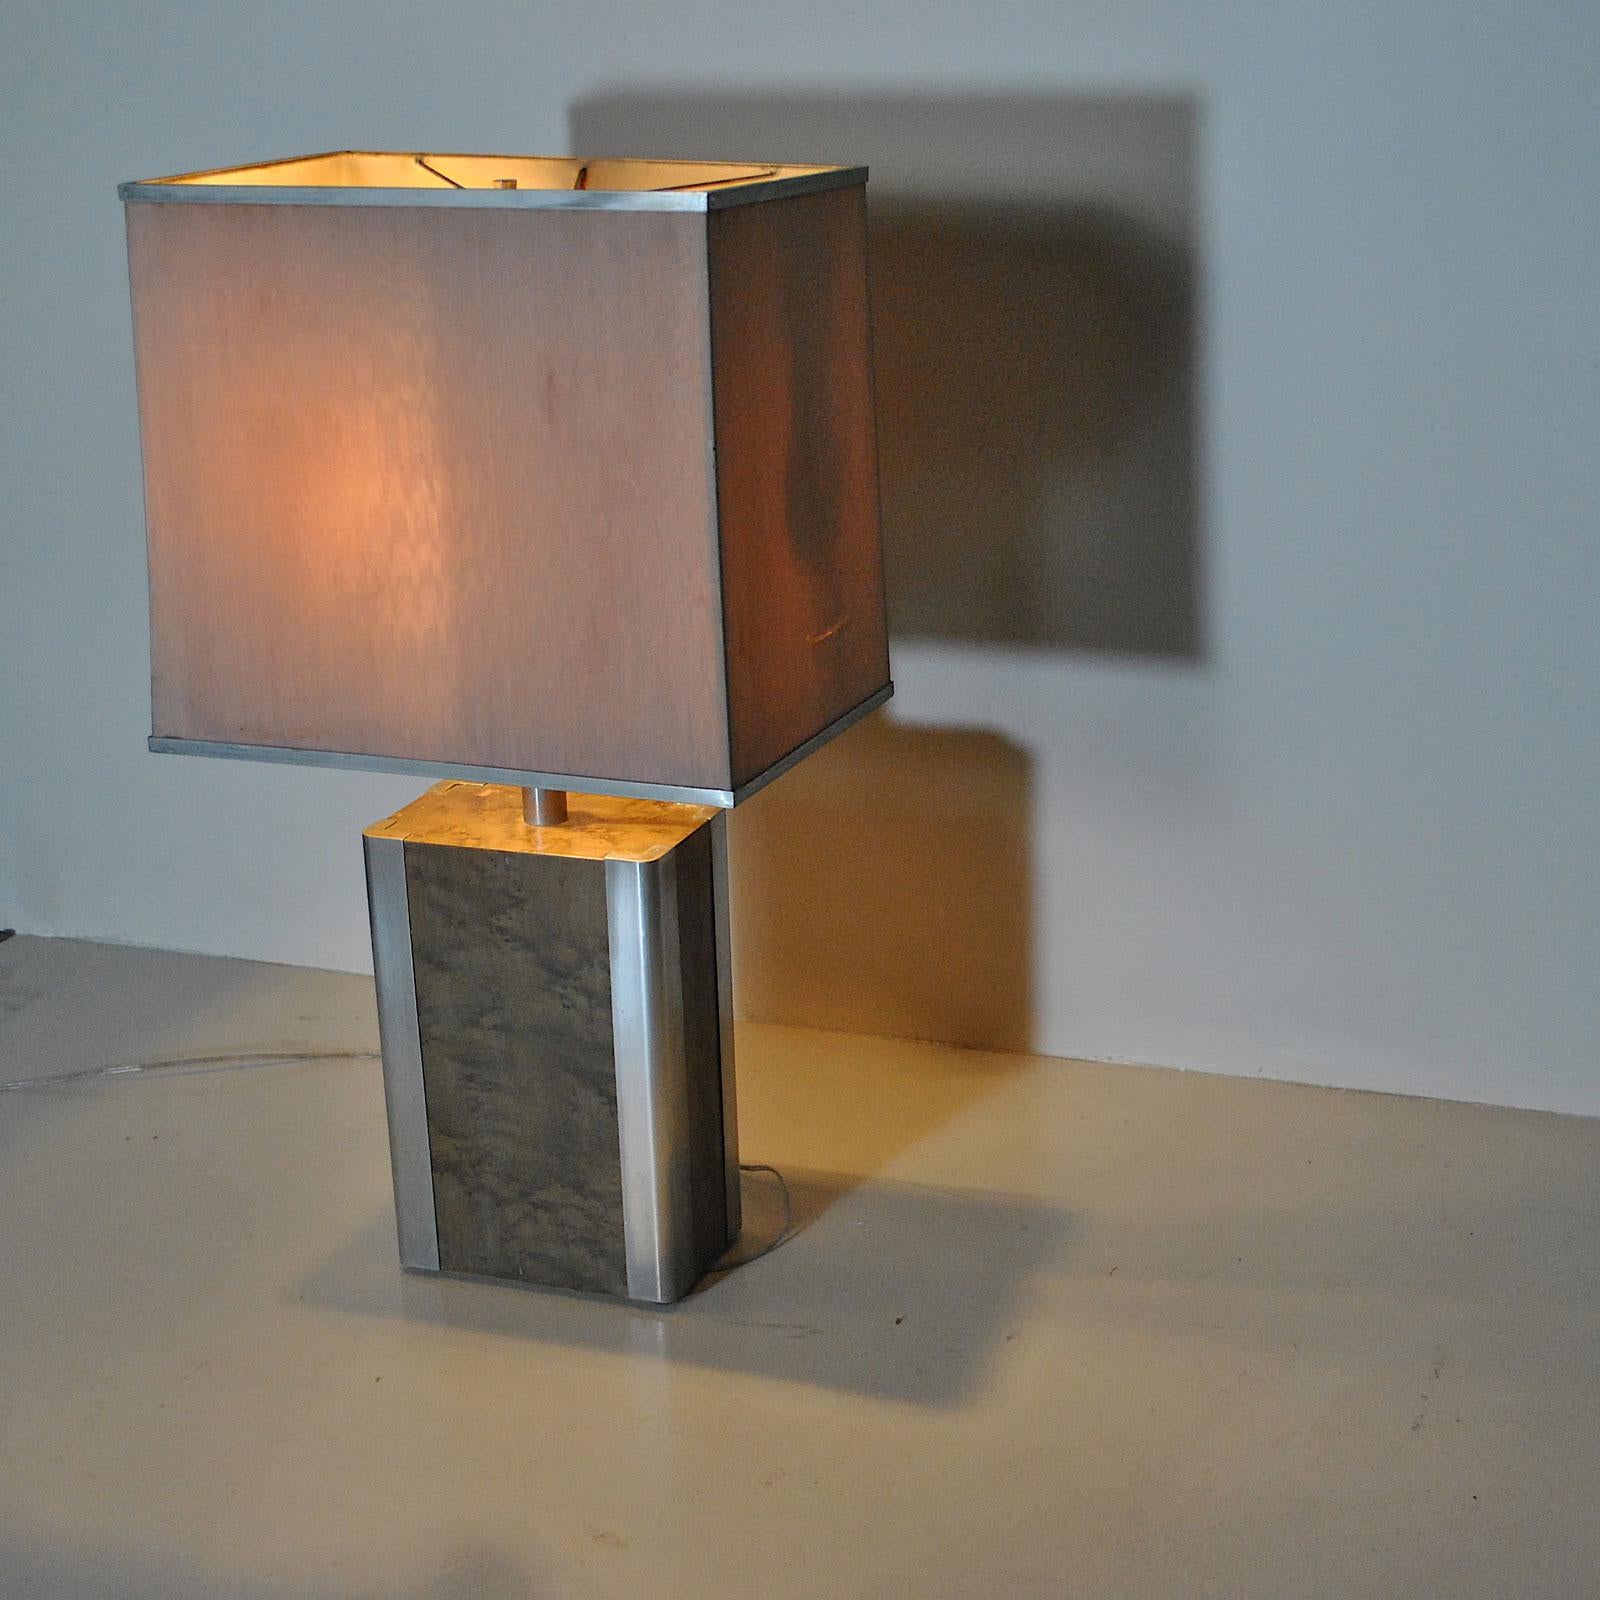 Italian Midcentury Table Lamp in Drawn Wood and Steel from the 1970s 7